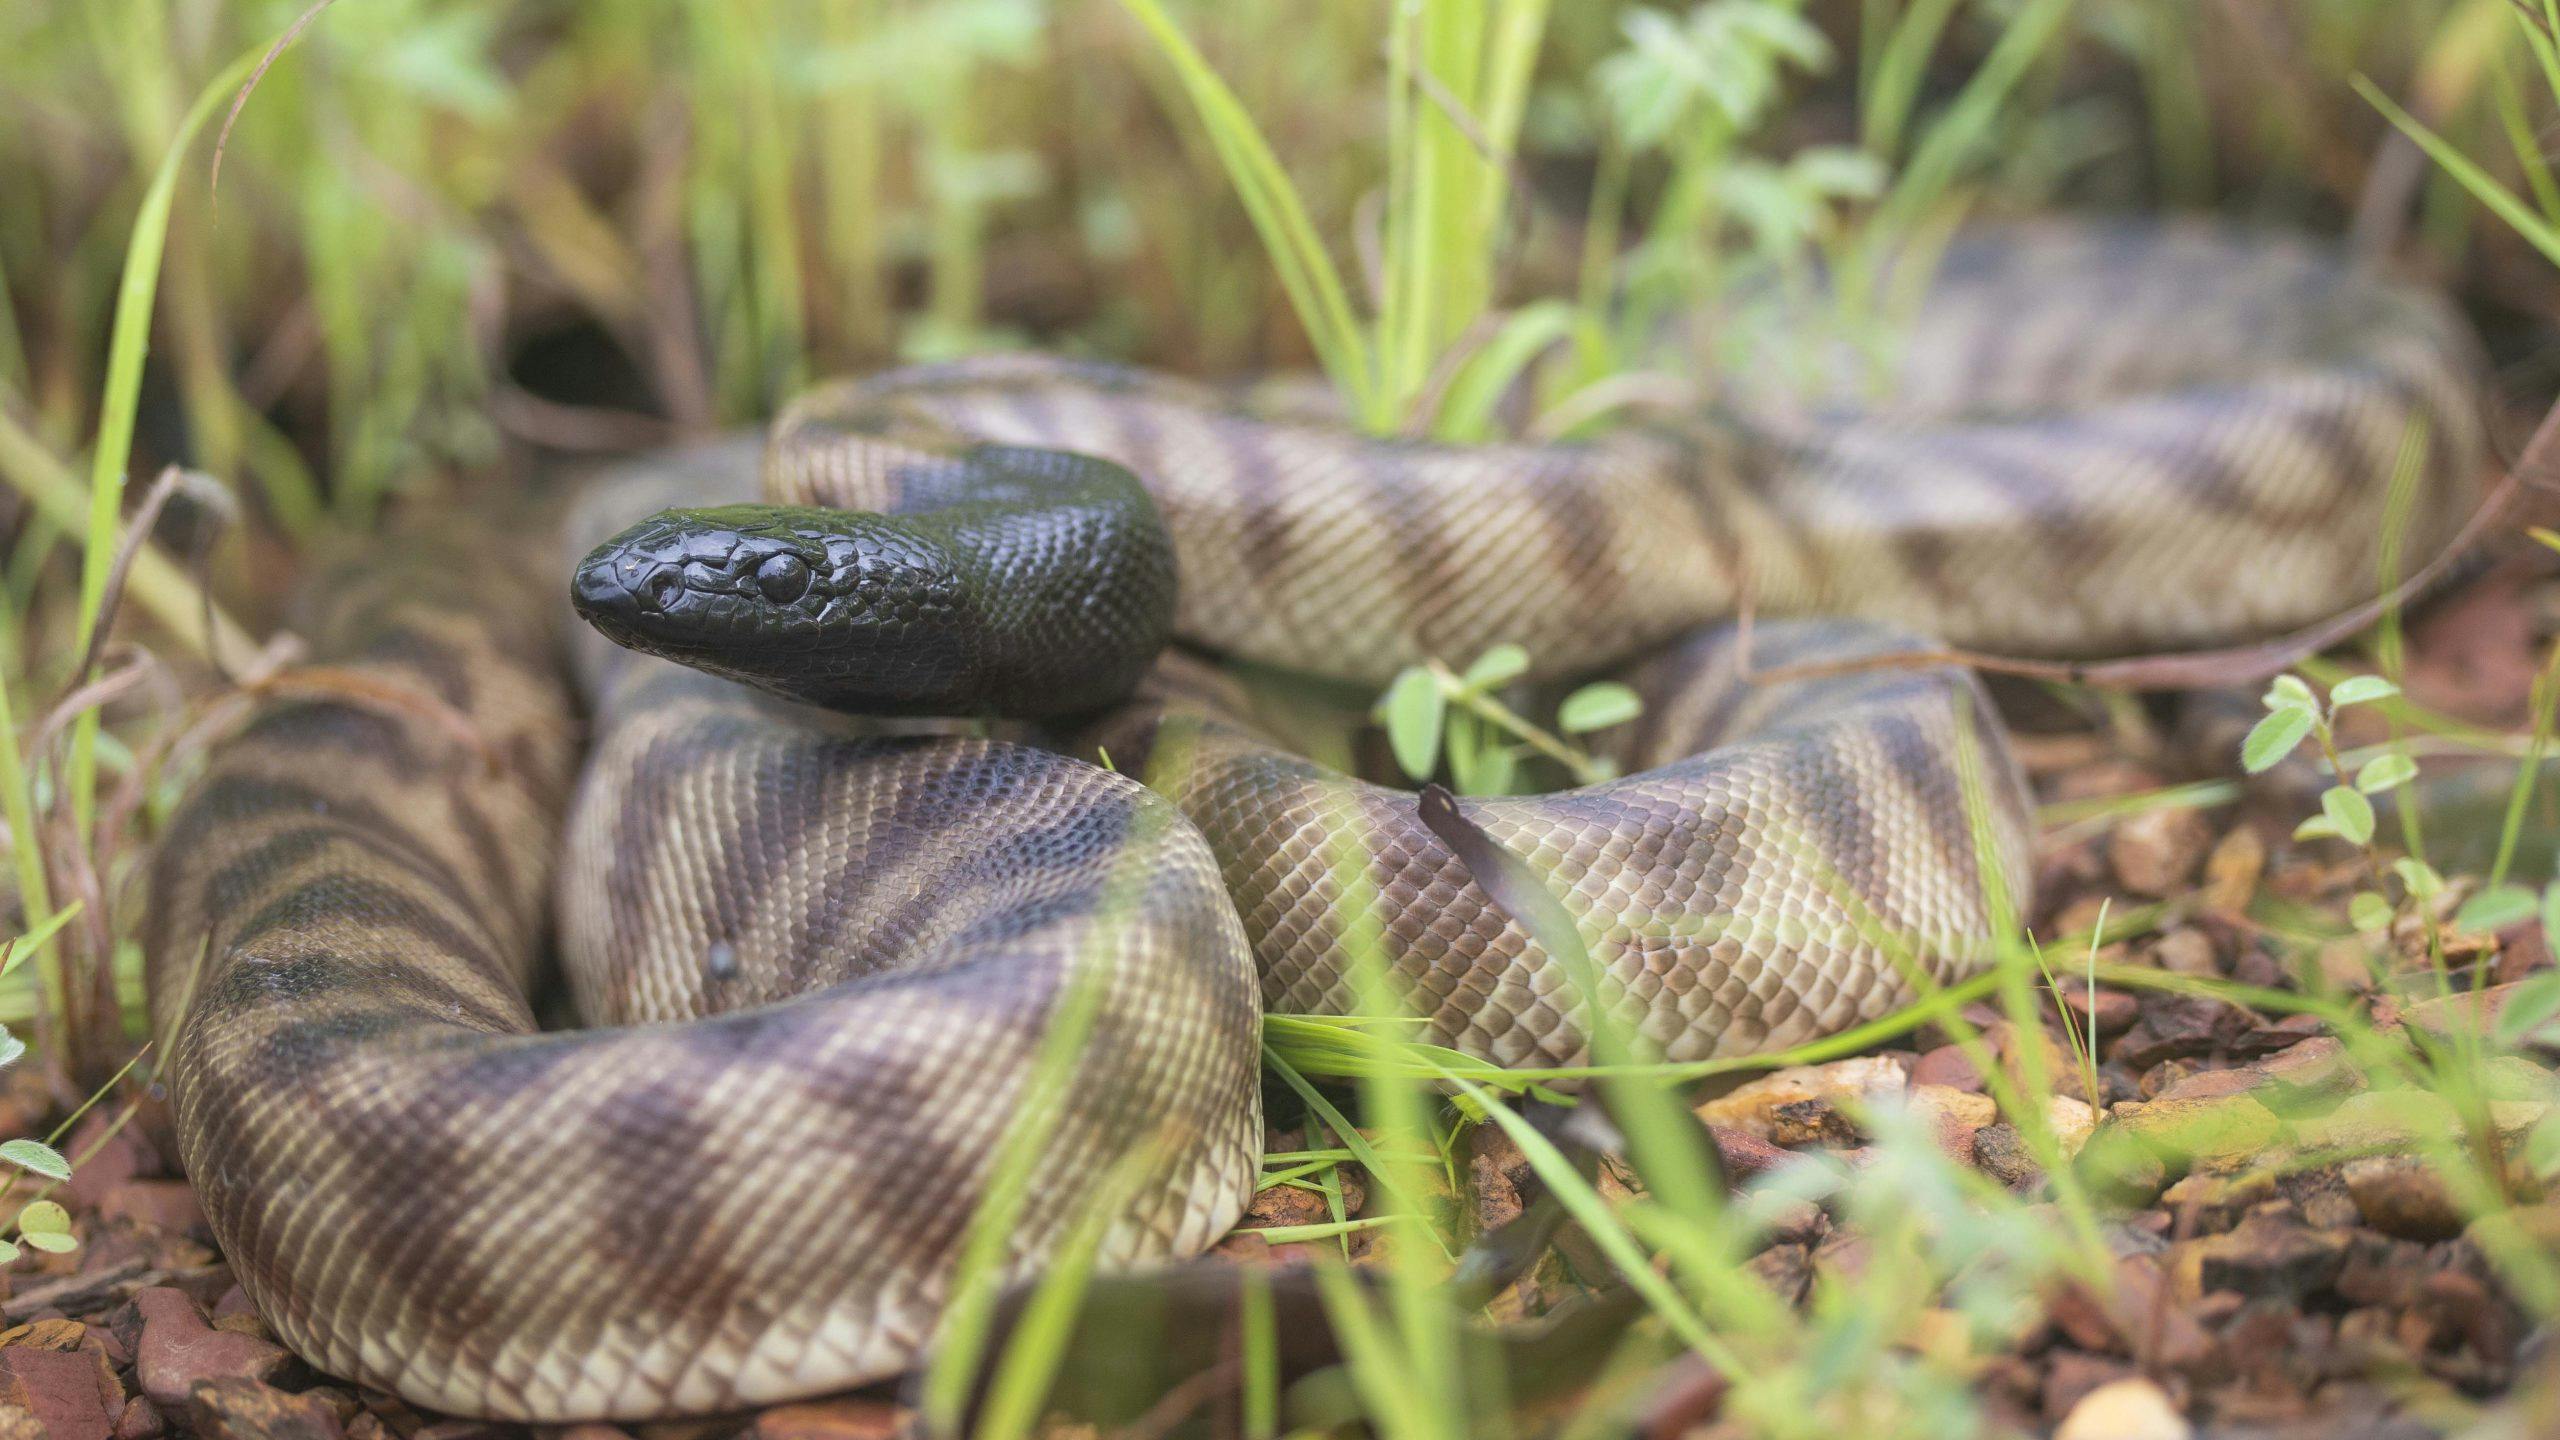 brown patterned python with a black head lying in grass